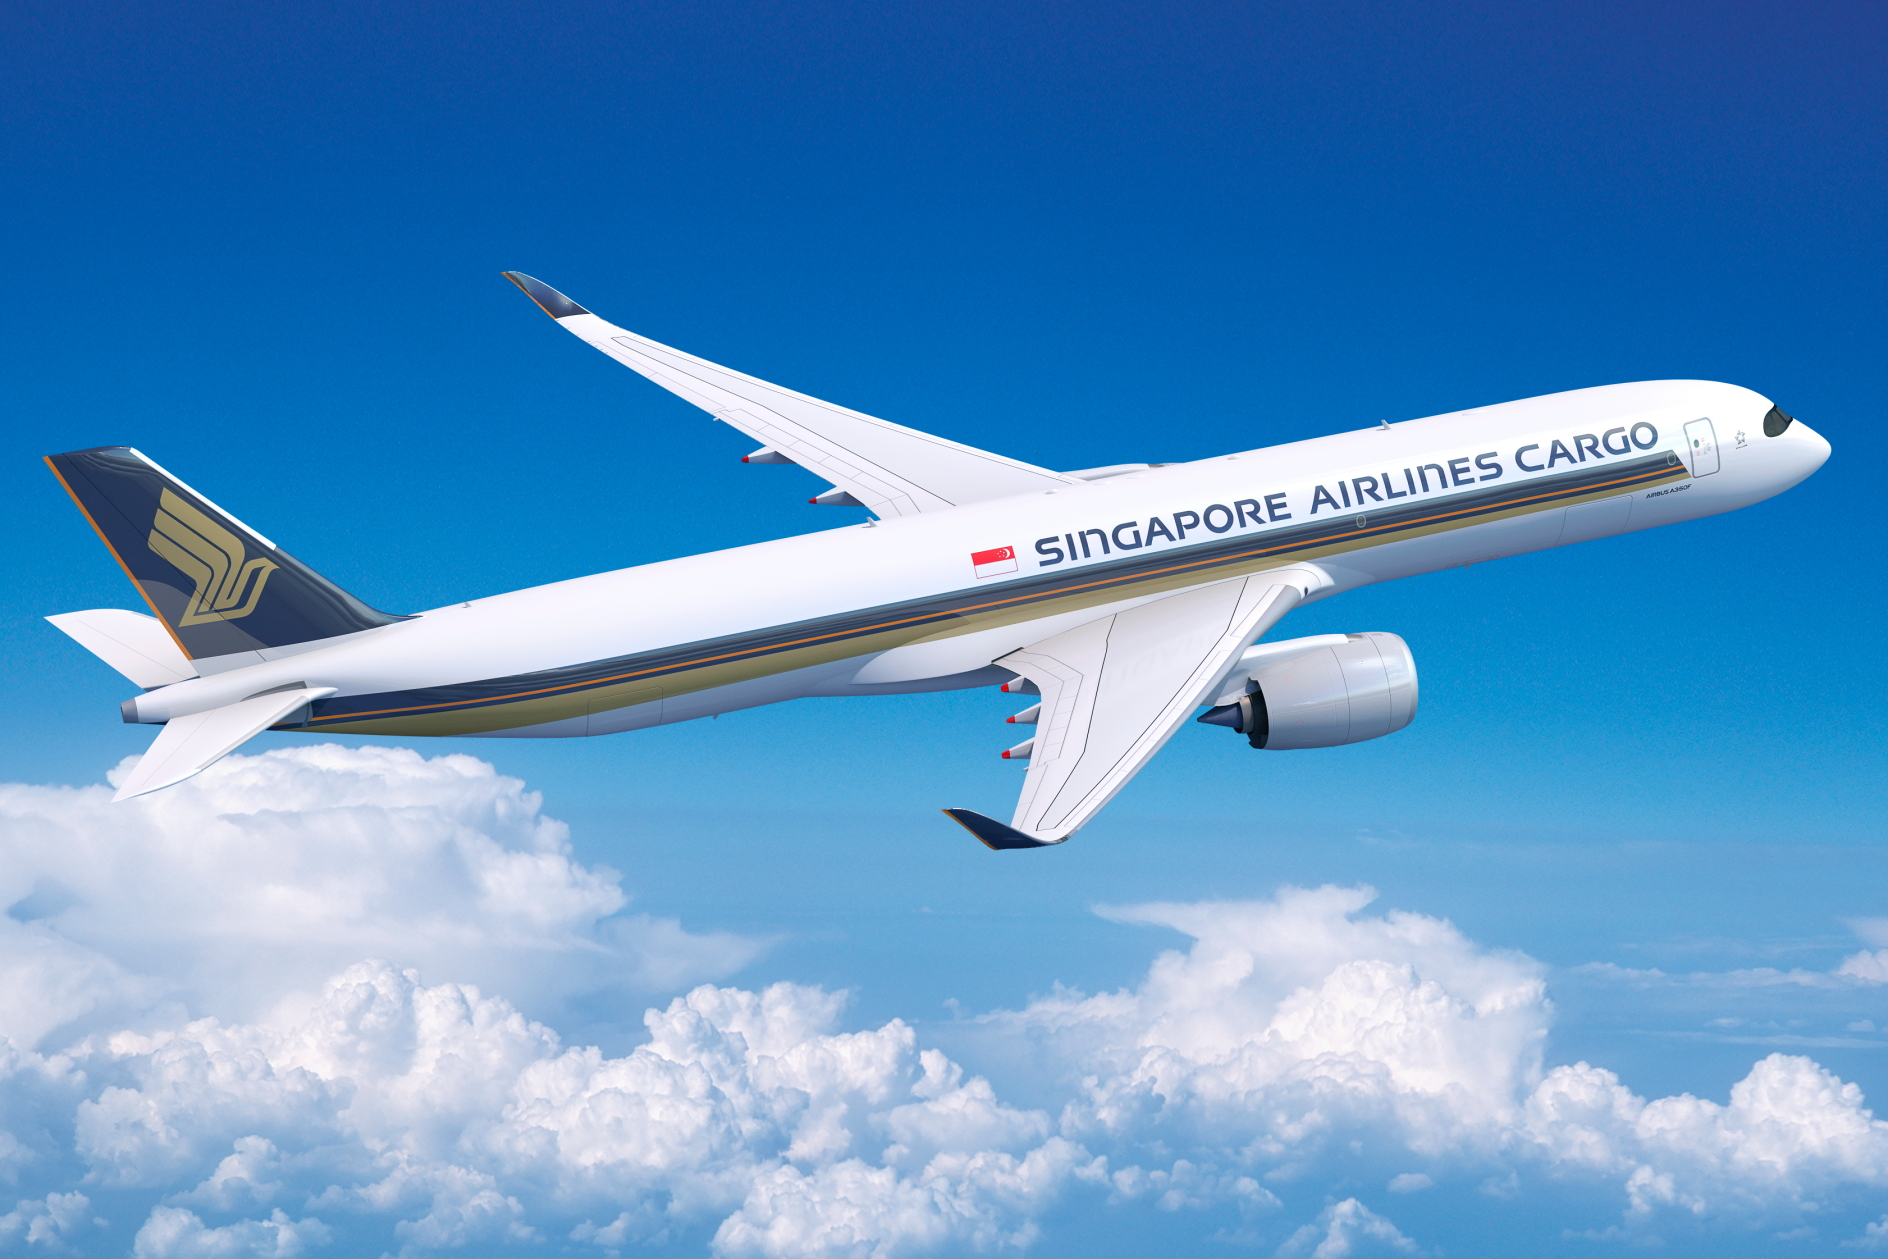 Rendering of a Singapore Airlines Airbus A350F. Click to enlarge.